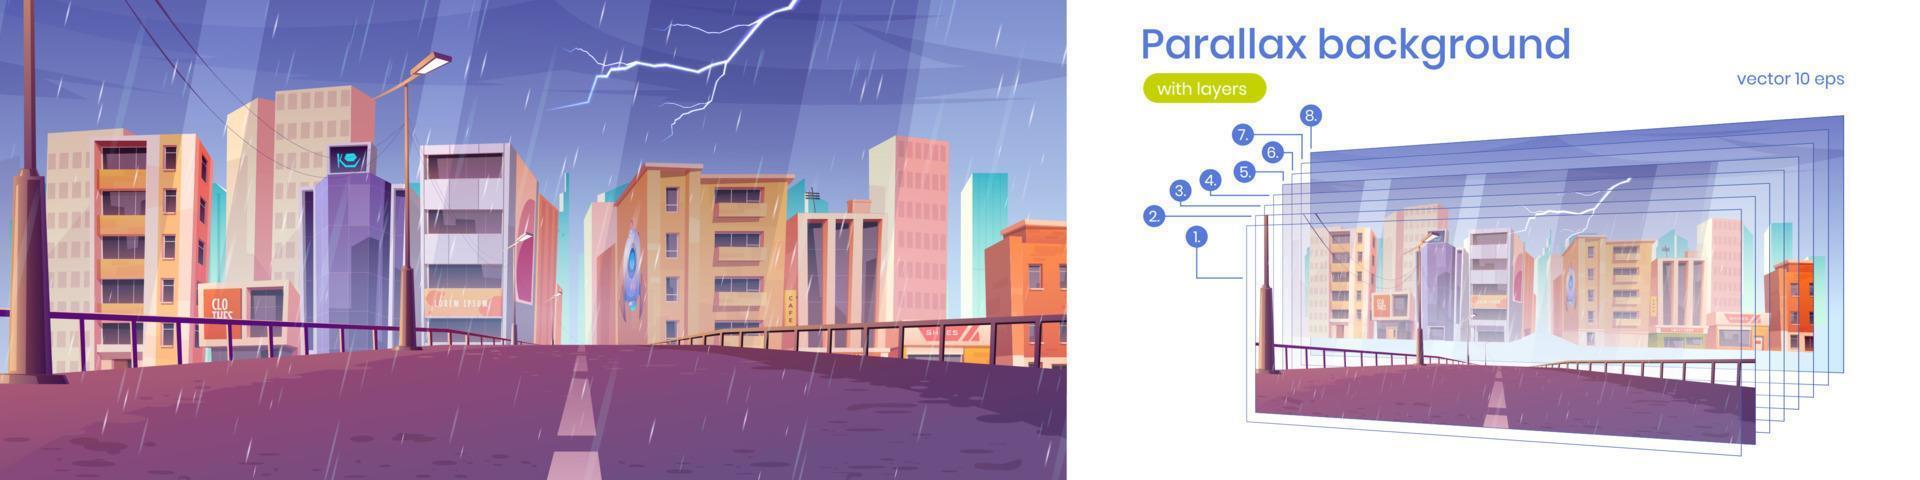 Parallax background with city road in rain vector